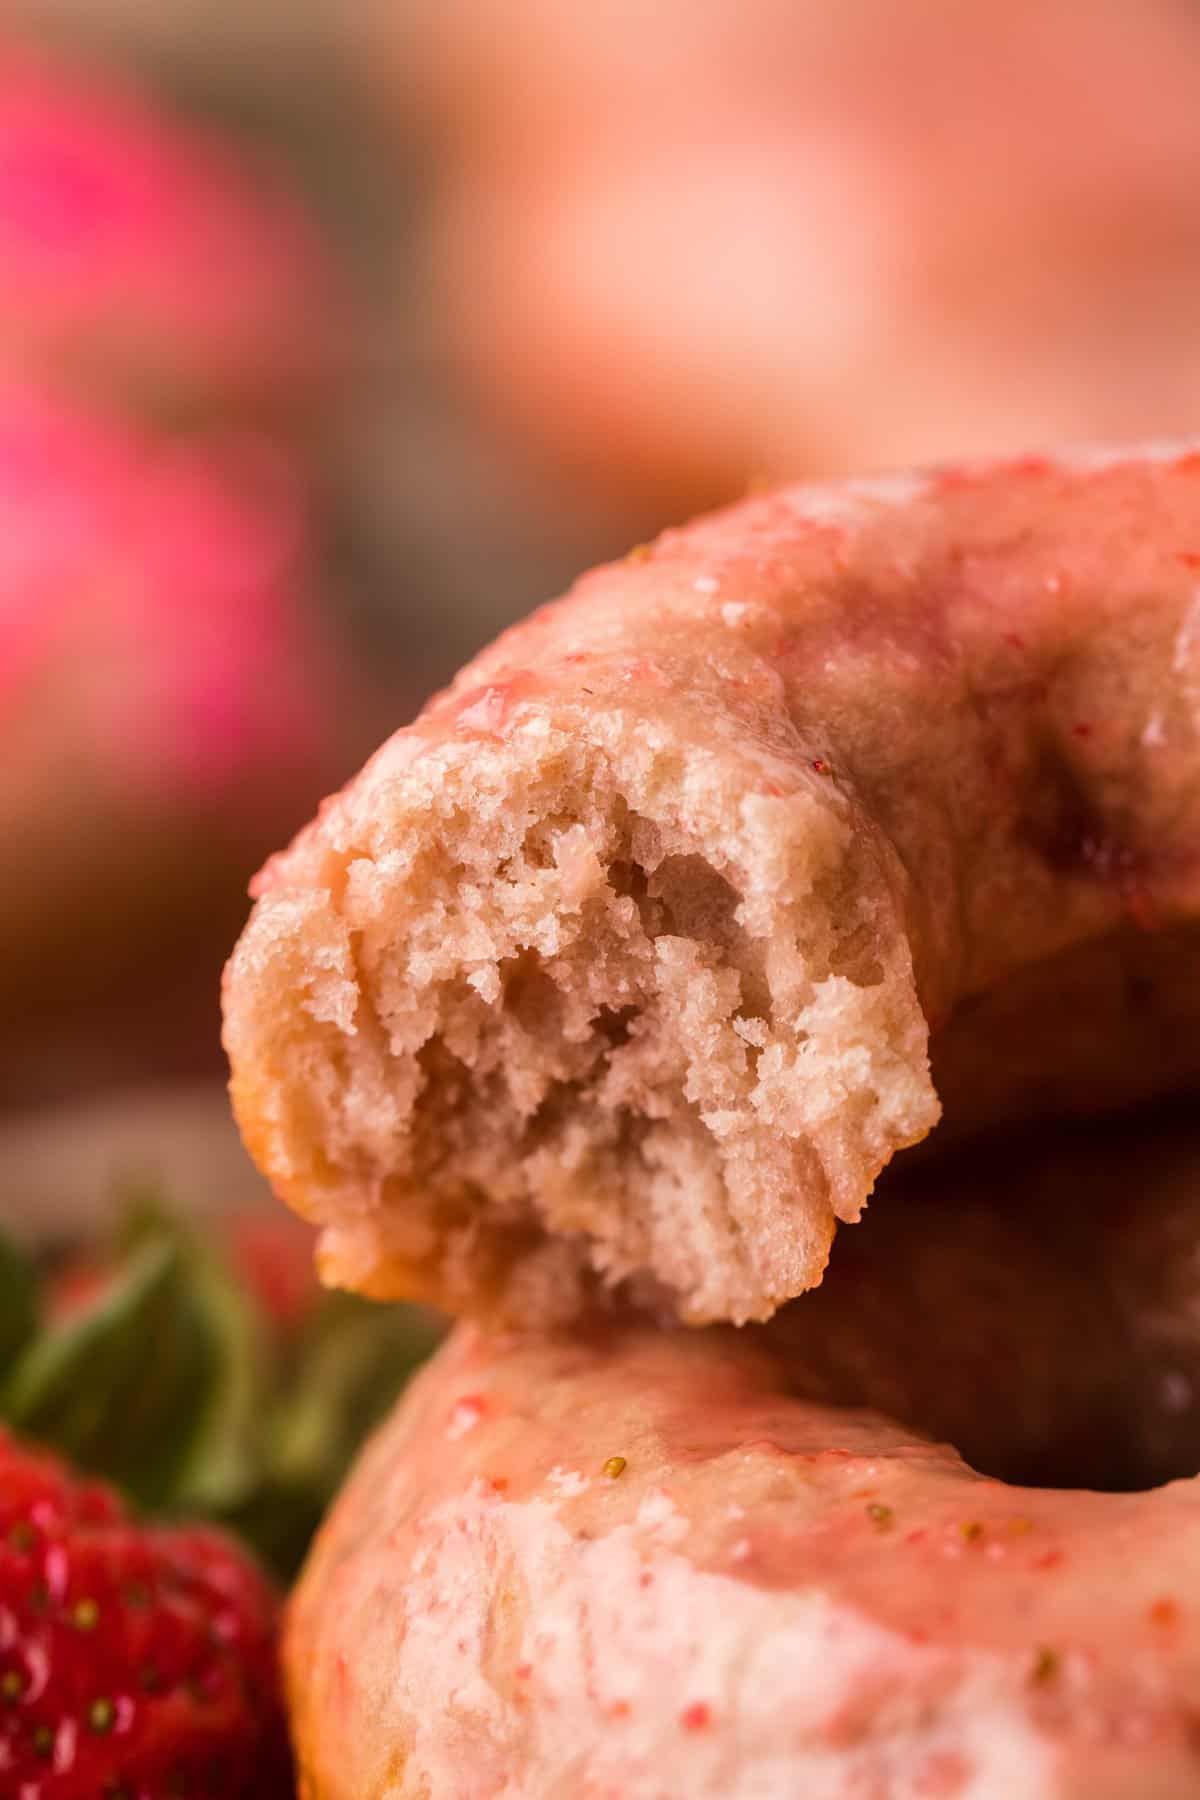 Up close photo of the fluffy moist texture of the inside of the donut.